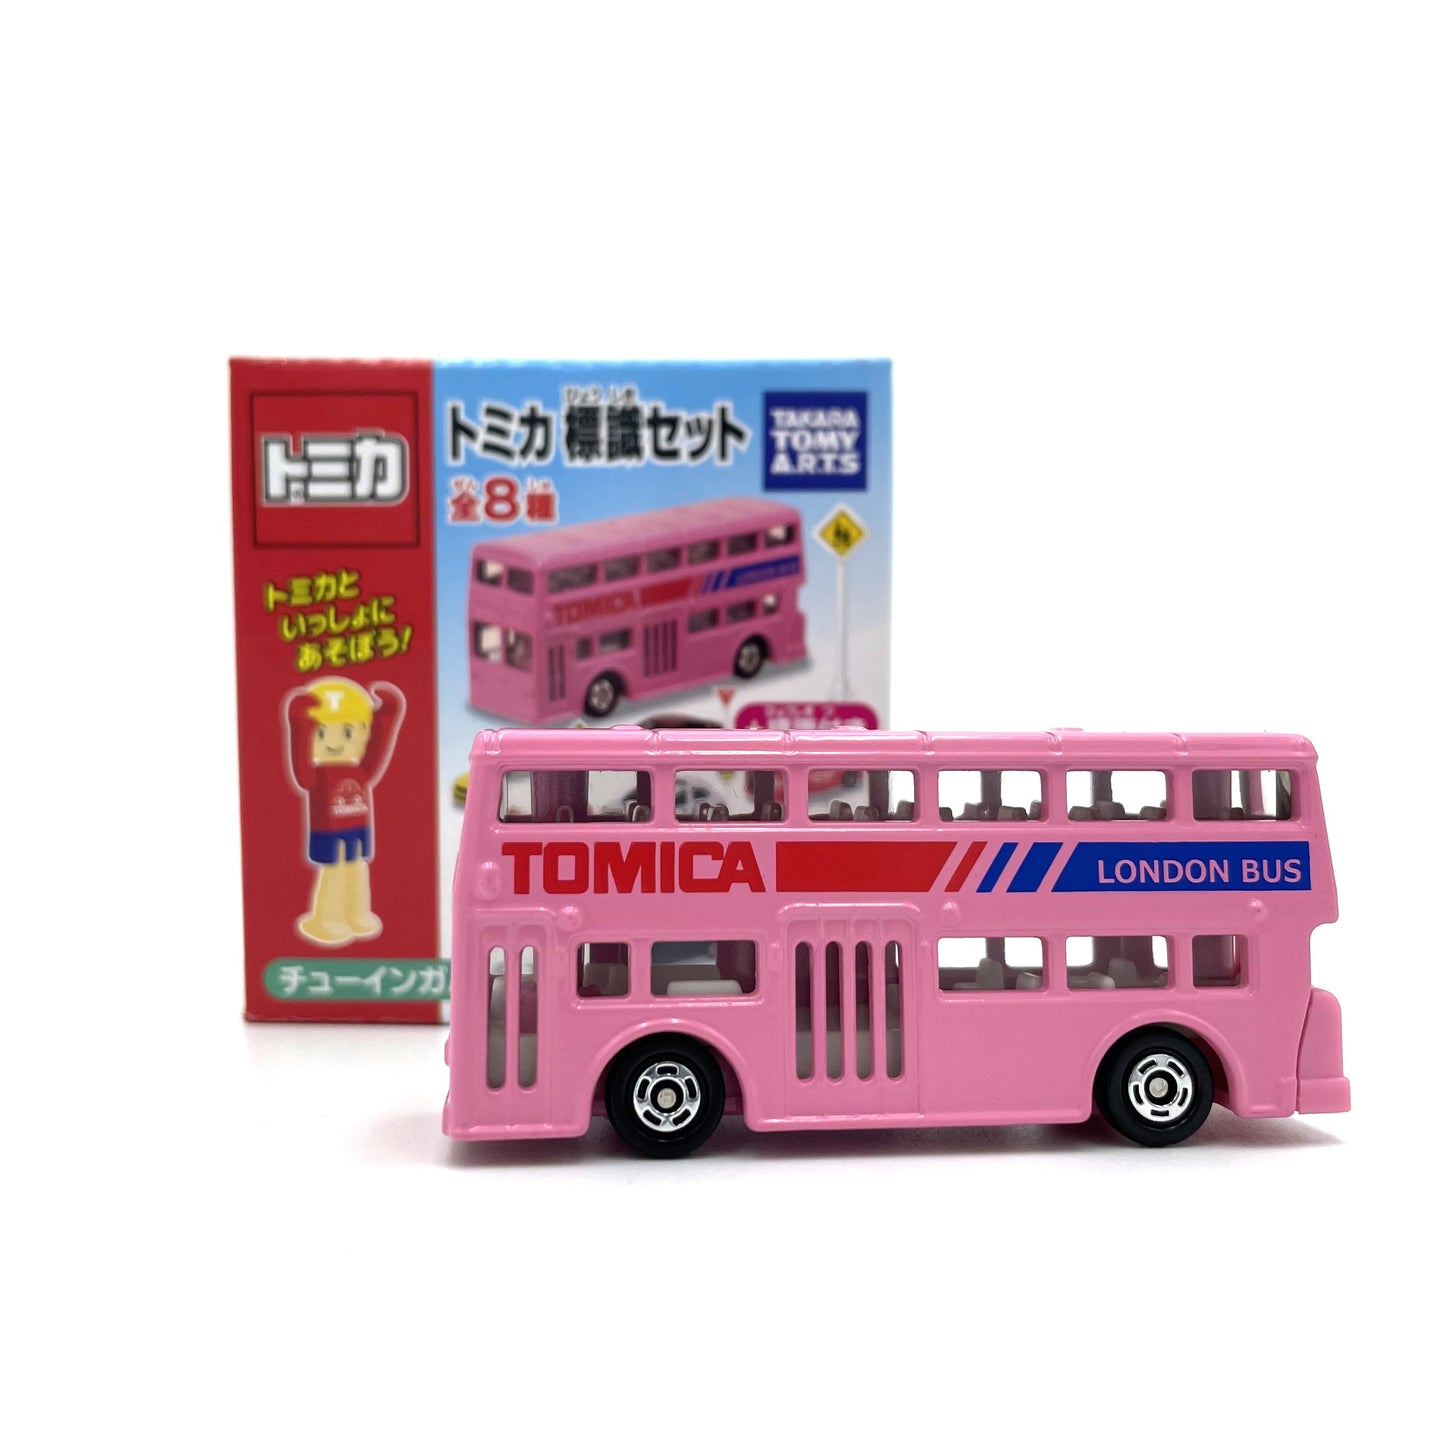 Takara Tomy Tomica - London Bus with Road Side Stand - Sign Set #1